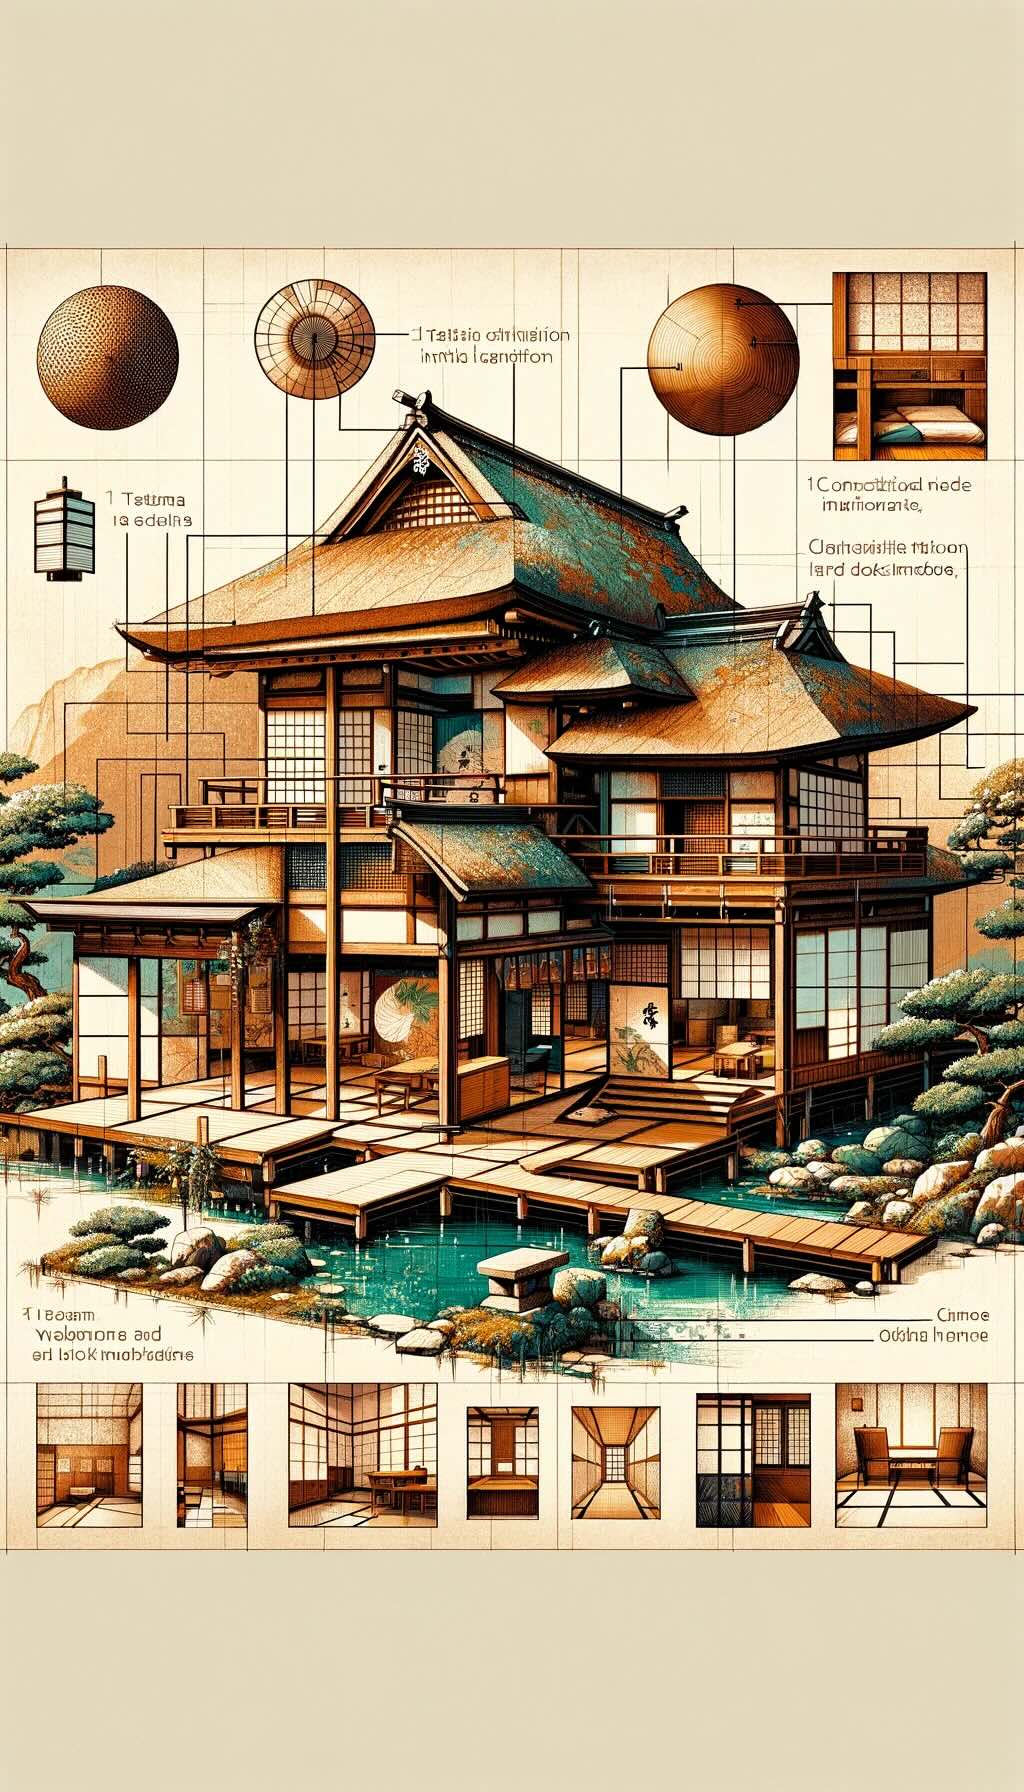 Unique features of ryokan architecture and design illustrates the harmonious connection to nature and the use of natural materials like wood, tatami mats, and earthen walls. The artwork includes elements such as sloping roofs, wide windows, gardens with koi ponds, and stone lanterns. It also highlights the internal layout aspects like tatami rooms, fusuma (sliding doors), tokonoma (alcove), and engawa (veranda), all showcasing the principles of Japanese design: simplicity, functionality, and harmony with nature. The Avant Garde style adds an abstract and innovative quality, capturing the essence of ryokan design as a masterclass in craftsmanship and tradition